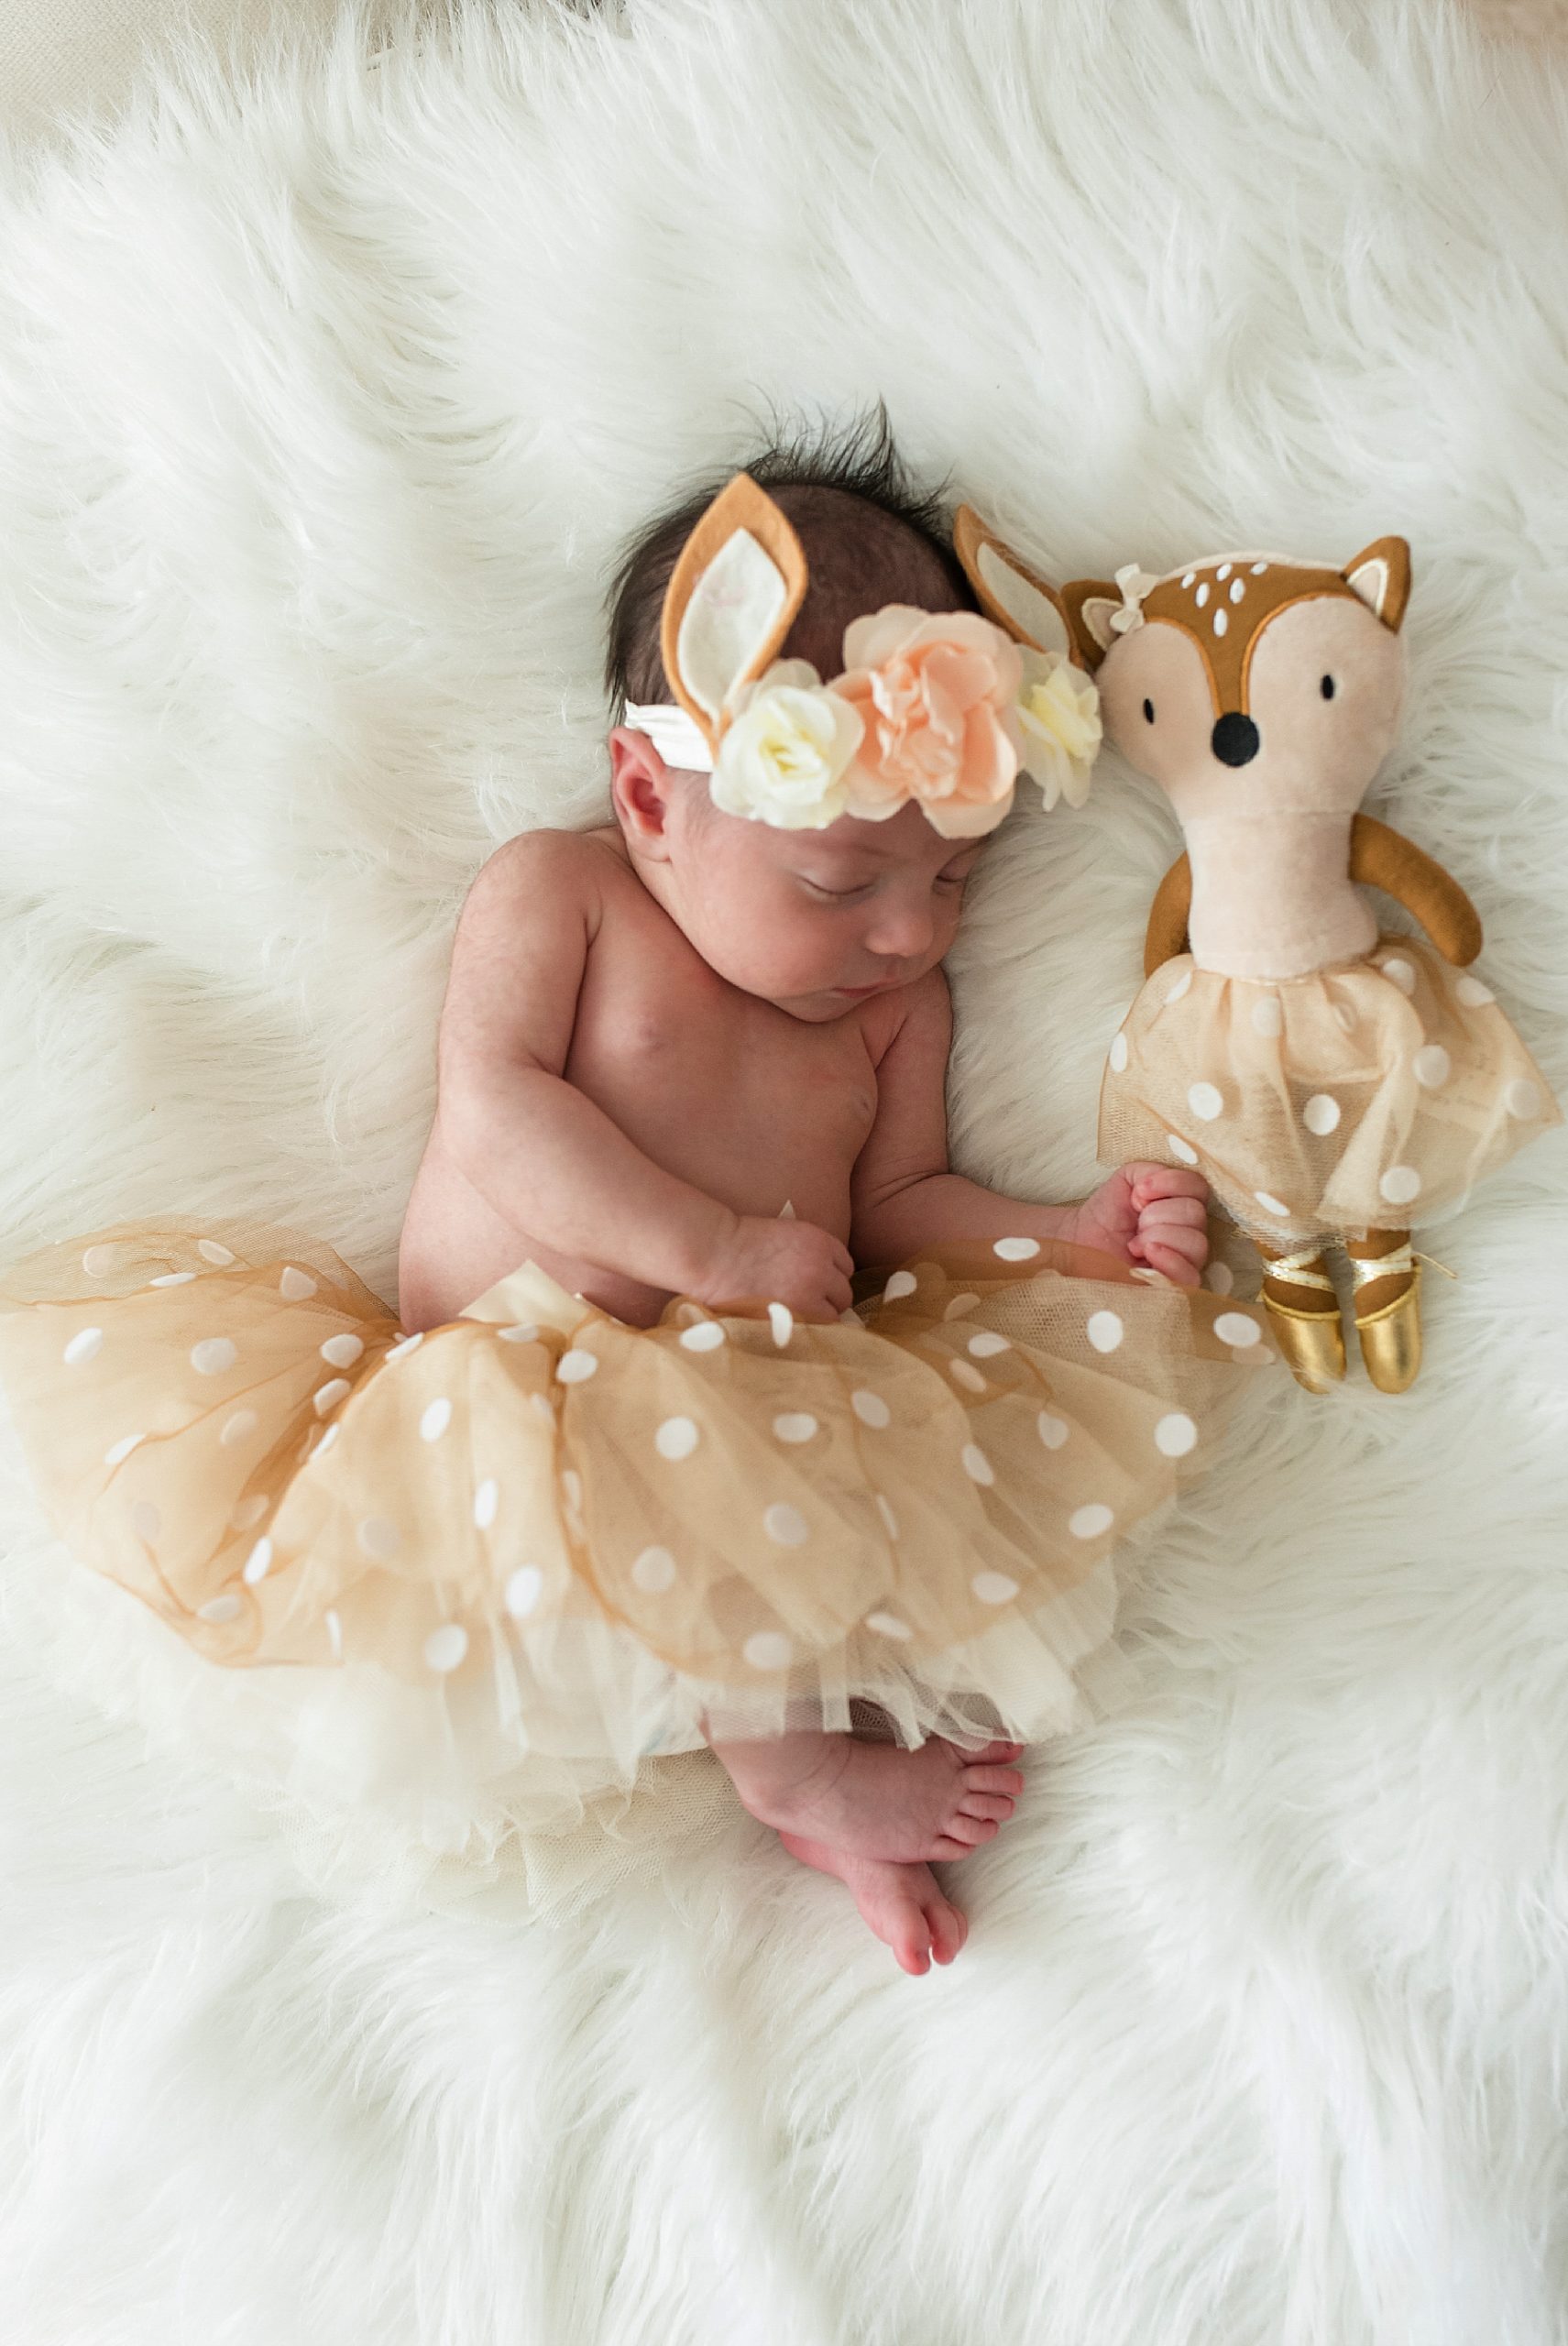 Newborn baby girl in deer outfit with flower crown in pink and white nursery | In-Home Newborn Photo Session | Lindsey Dutton Photography | Dallas Area Family Photographer | newborn session, newborn posing ideas, newborn photos, girl nursery inspiration | via lindseyduttonphotography.com